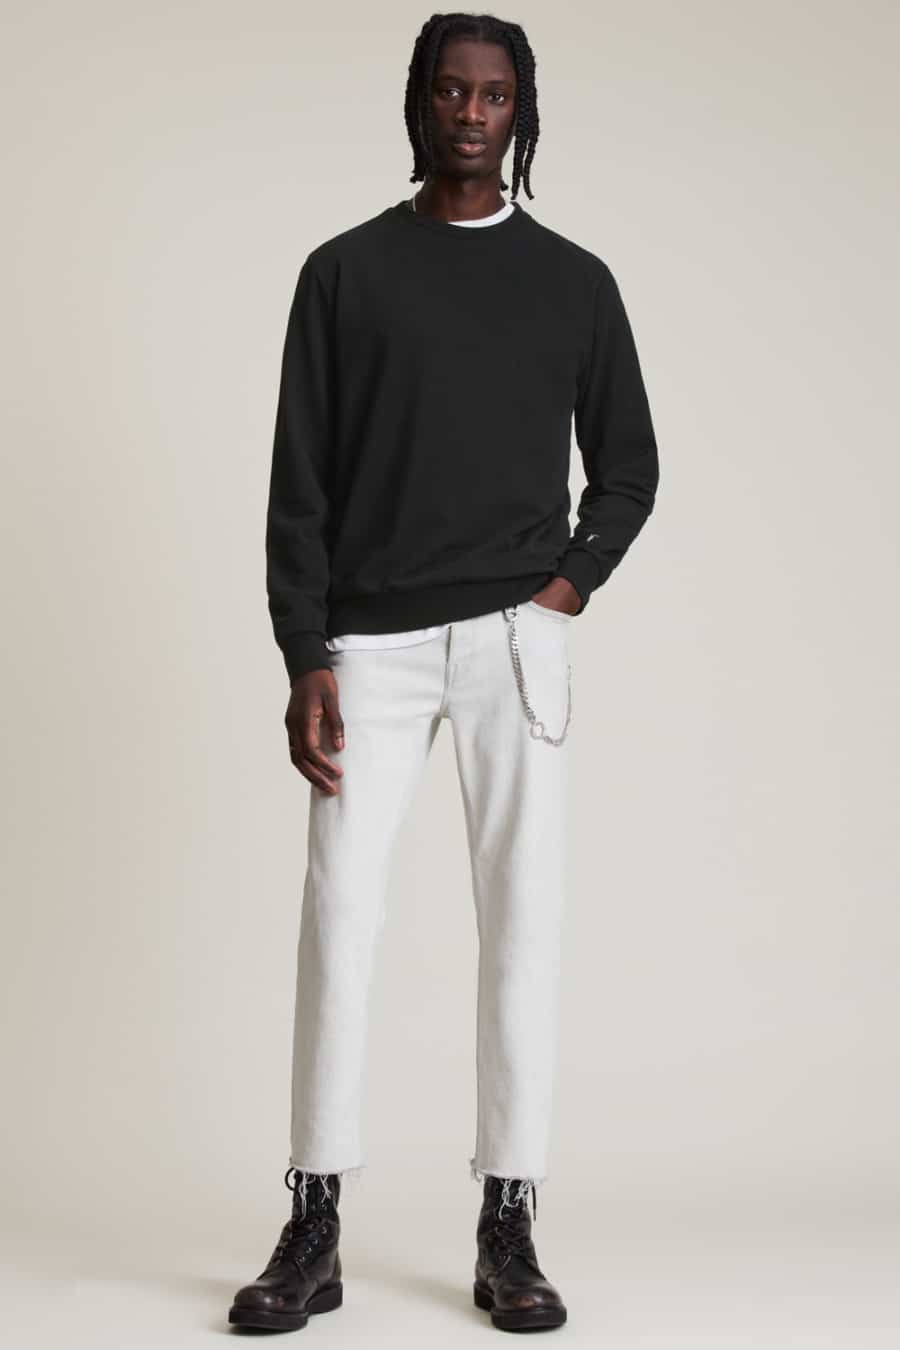 Men's white pants, black sweatshirt and black leather boots outfit